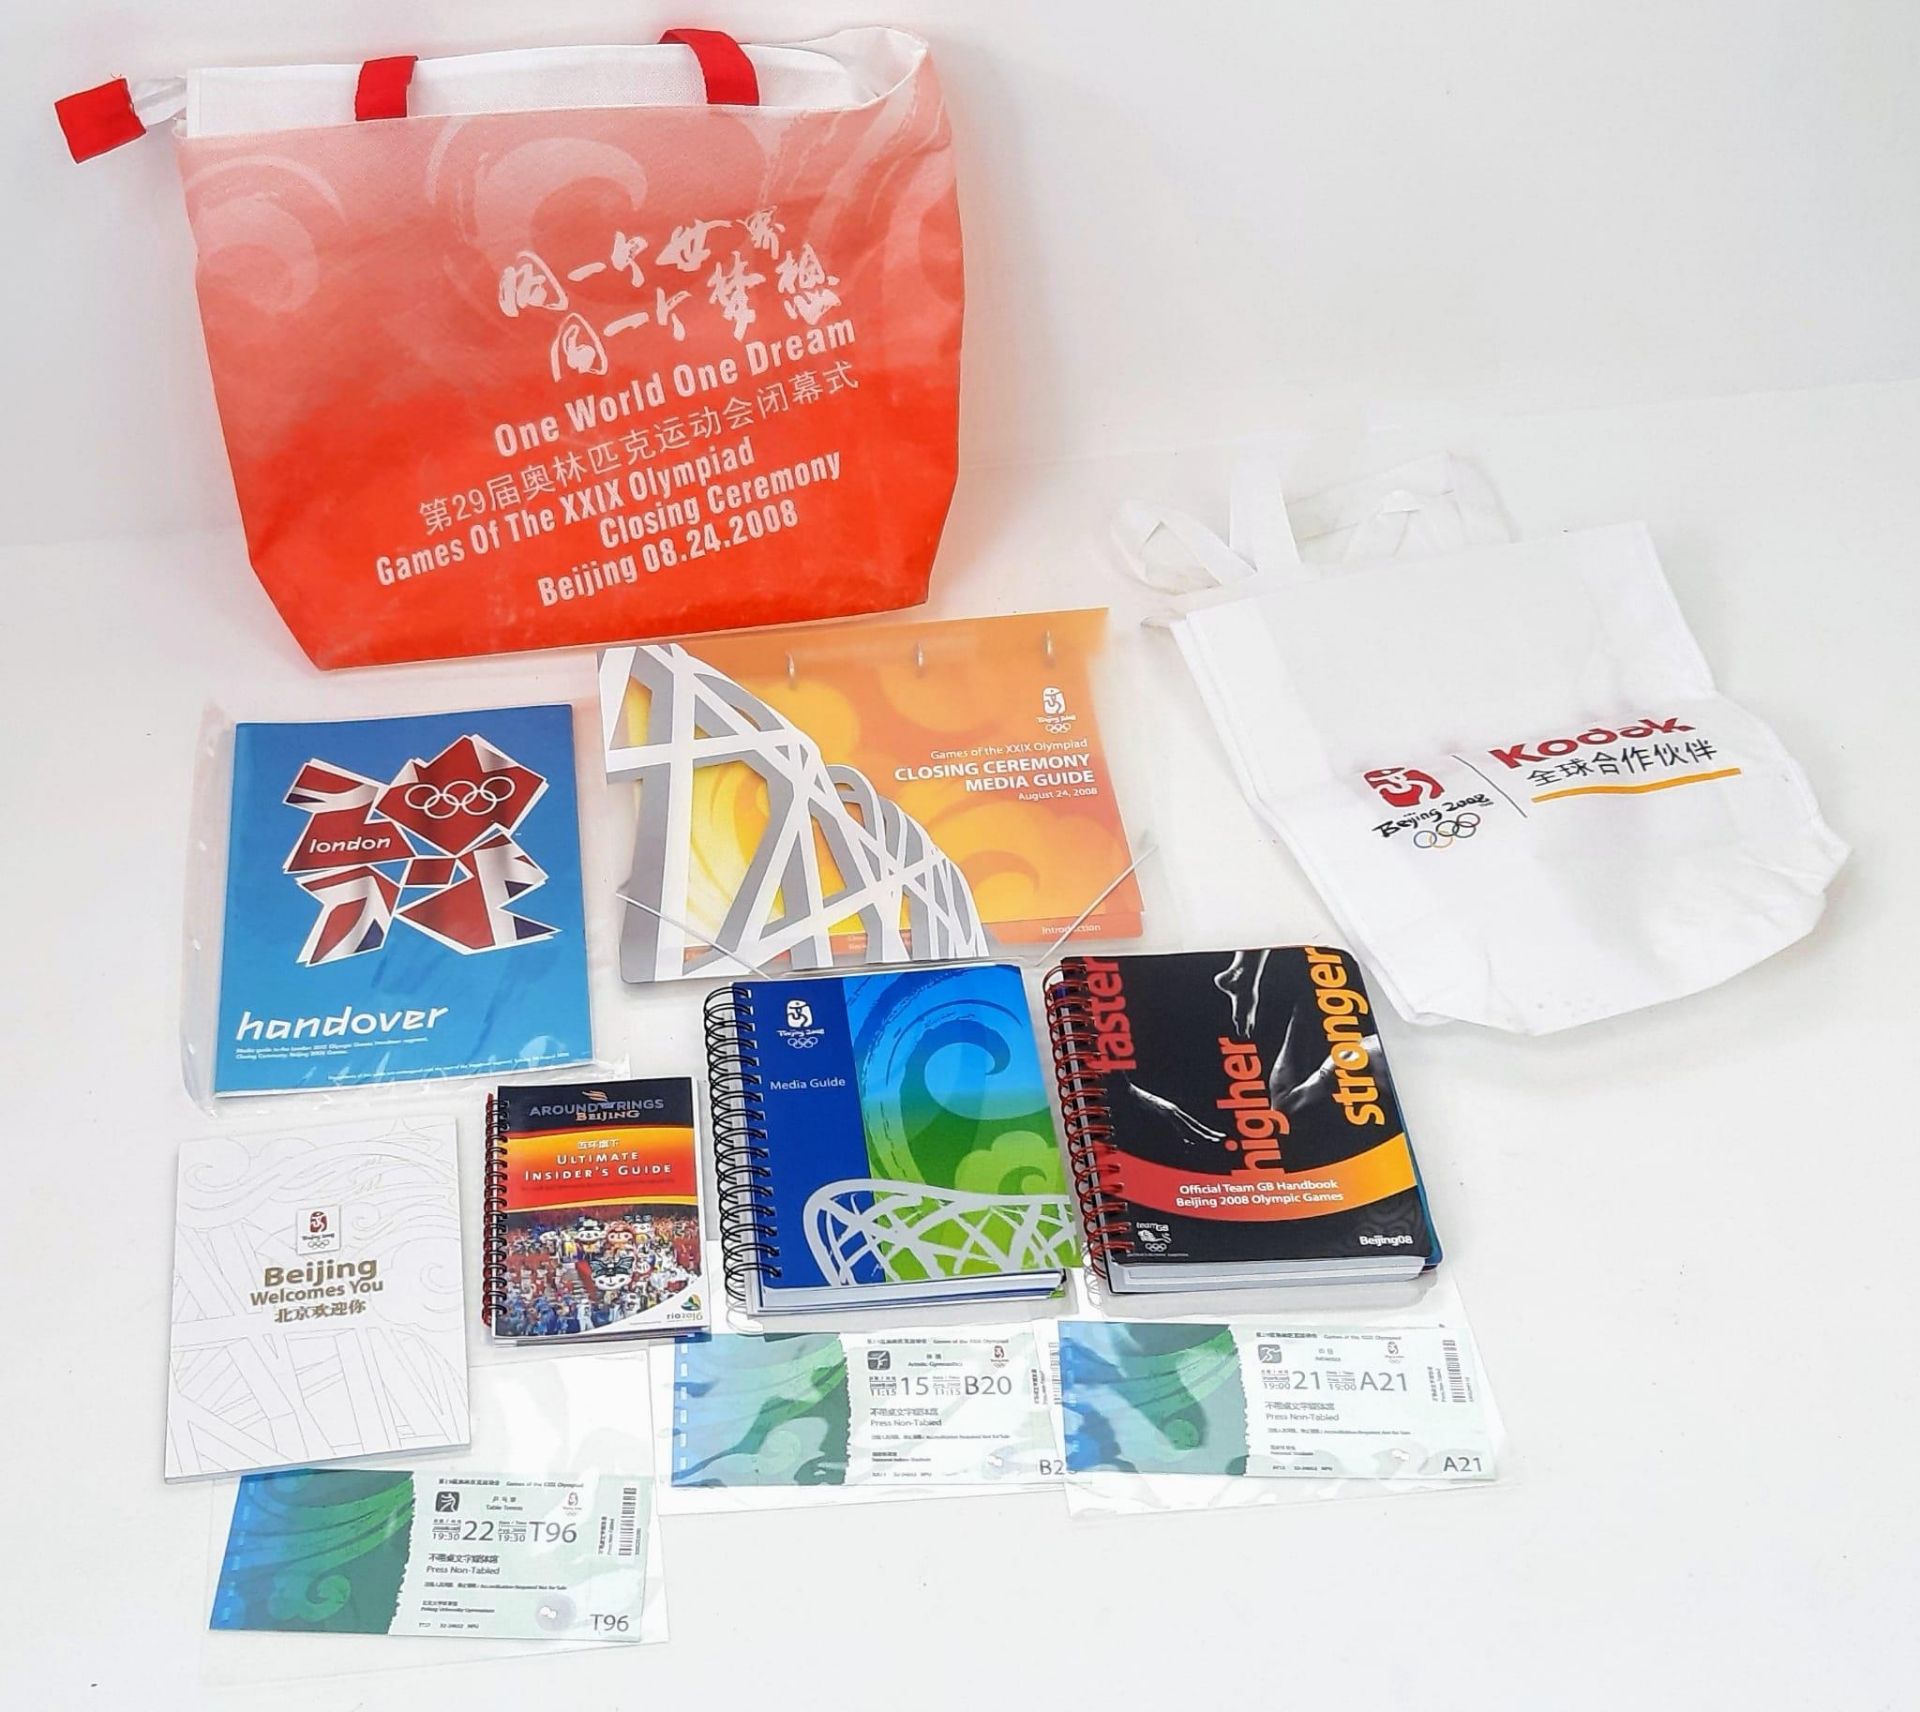 A Beijing 2008 Olympics Press/Media Pack. Includes tickets, brochures and other collectibles. - Image 2 of 12